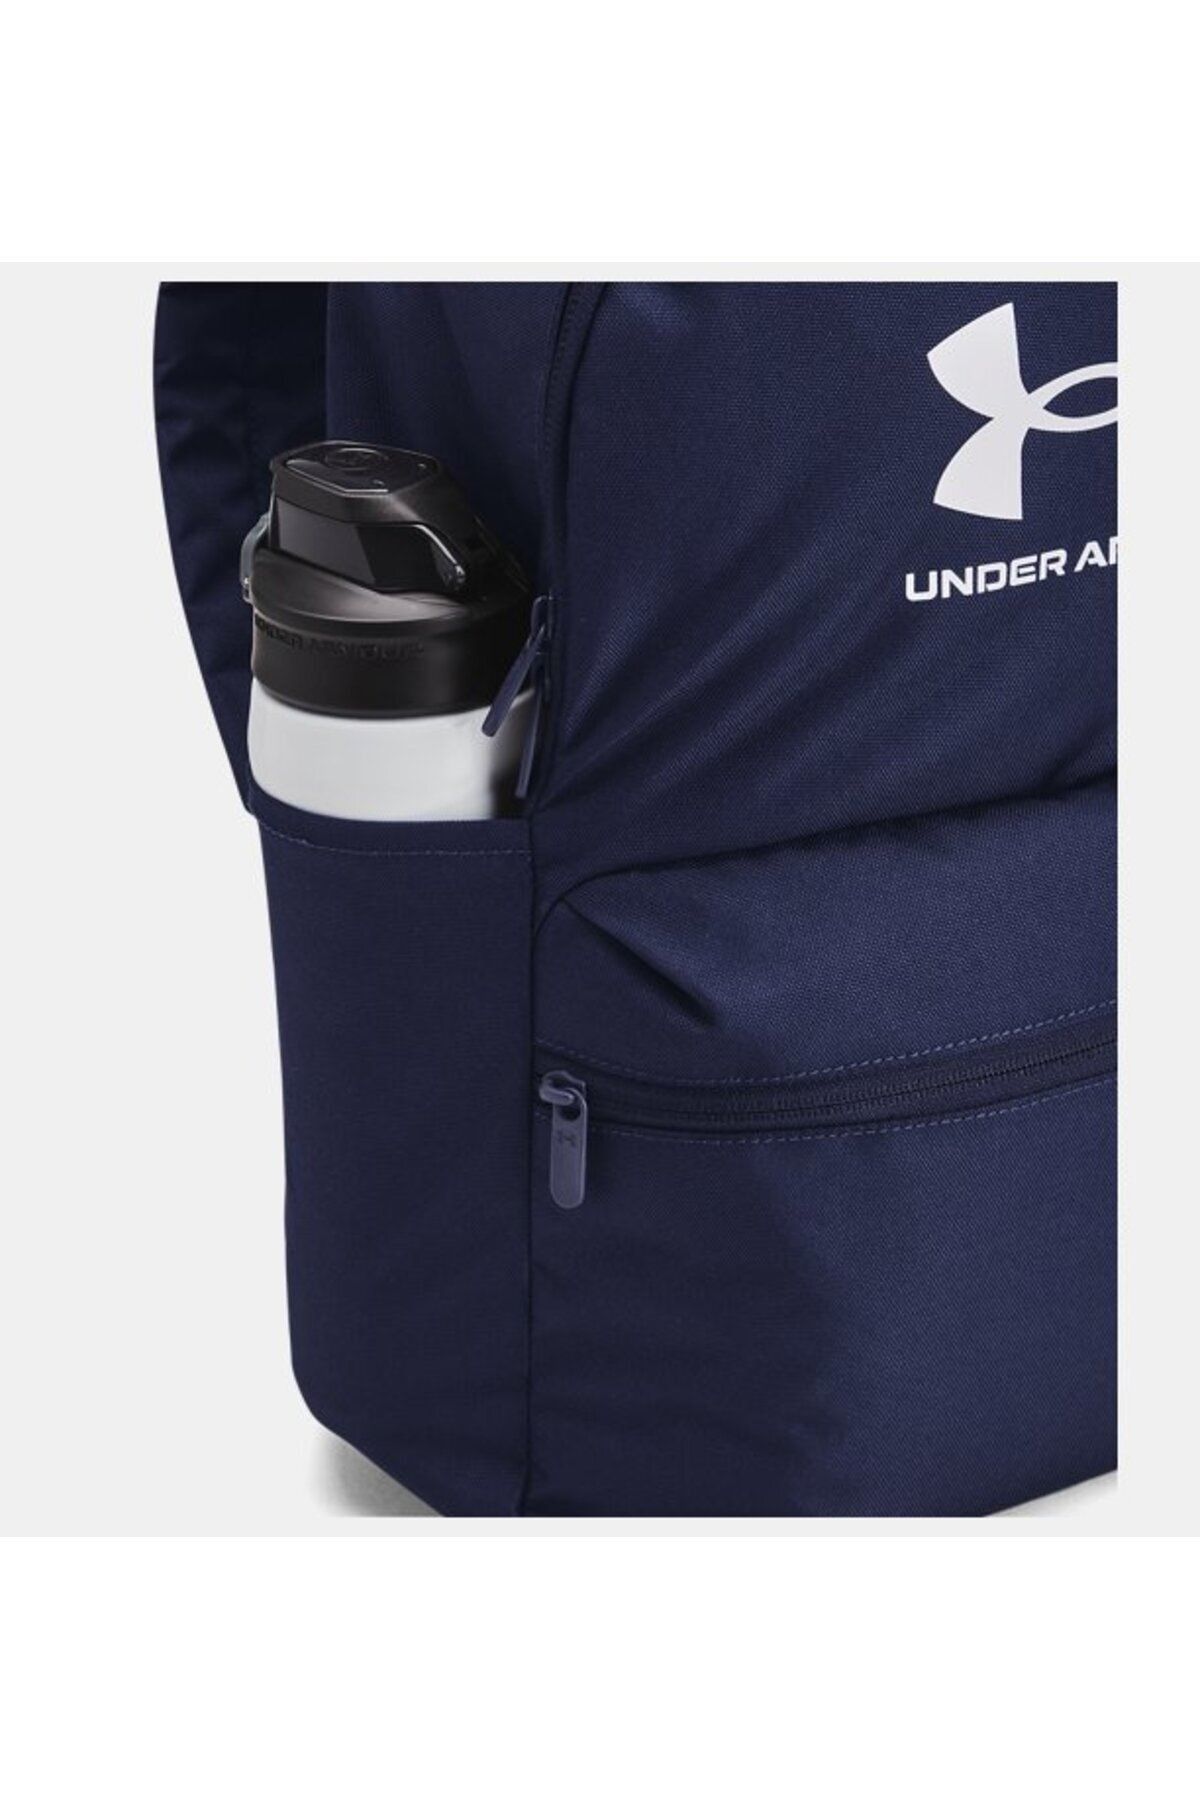 Under Armour UA Loudon Lite Backpack 1380476-410